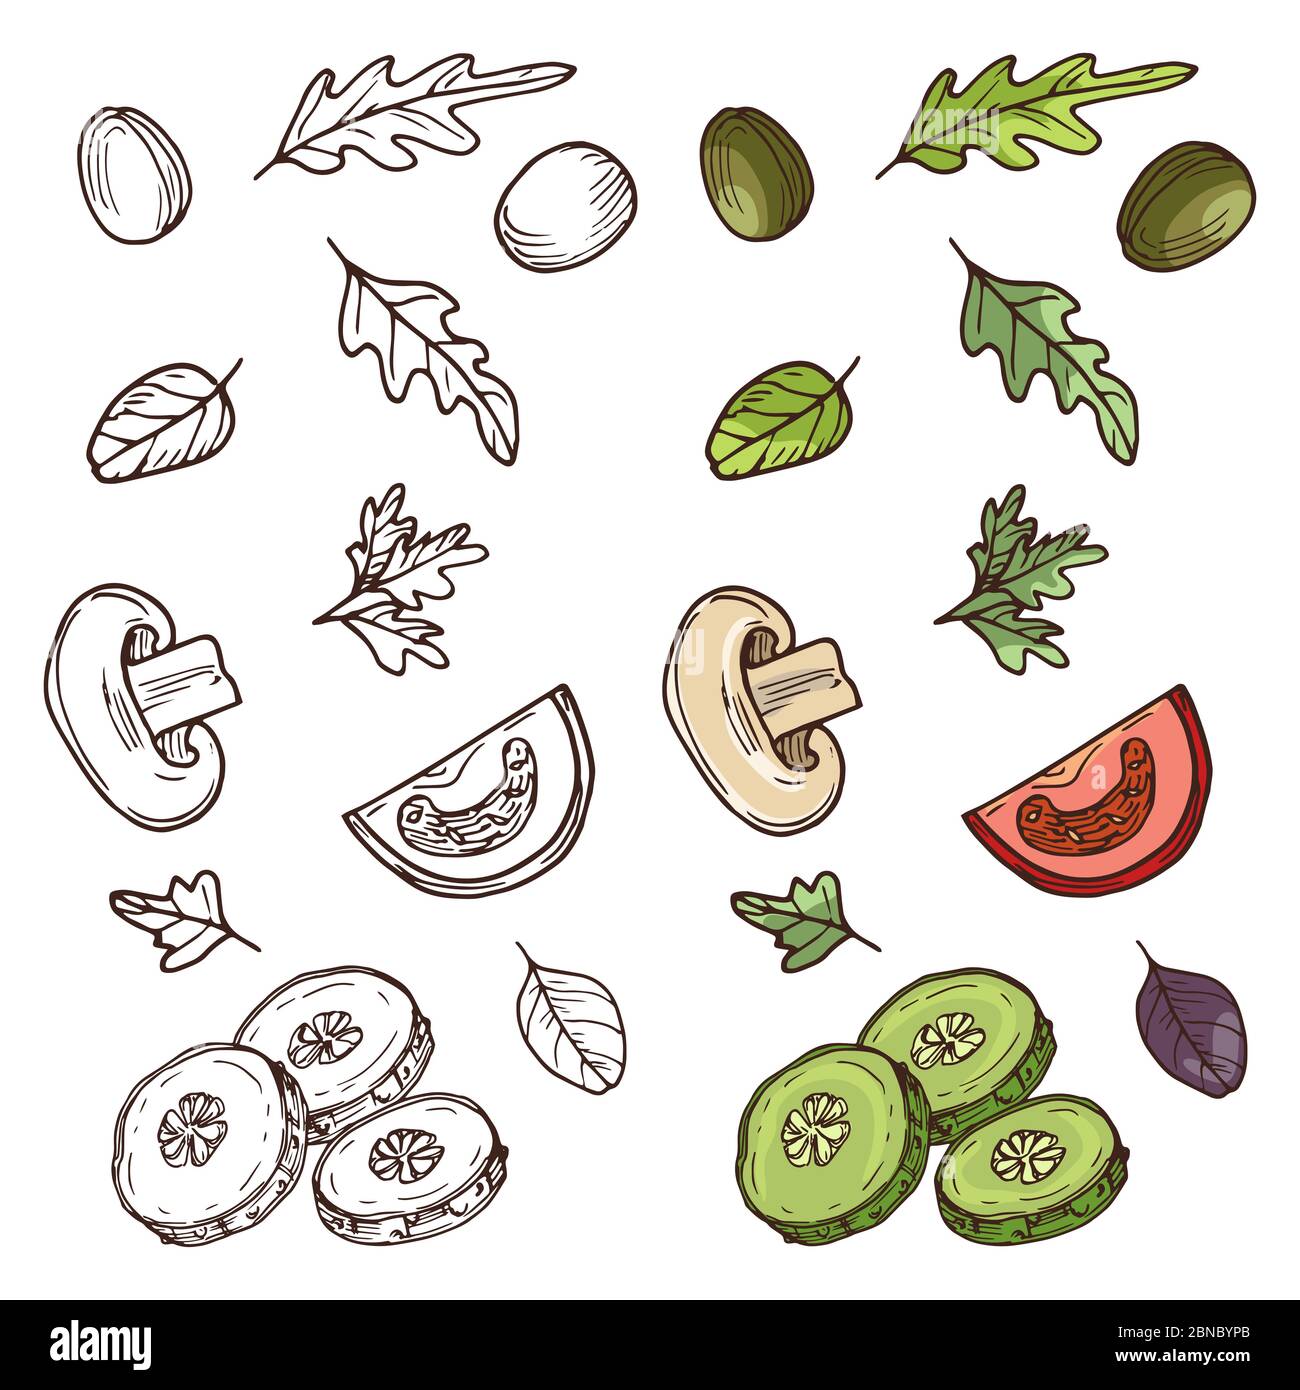 Hand drawn vegan salad ingredients. Tomato, cucumber, olives, greens isolated on white background. Vector illustration Stock Vector